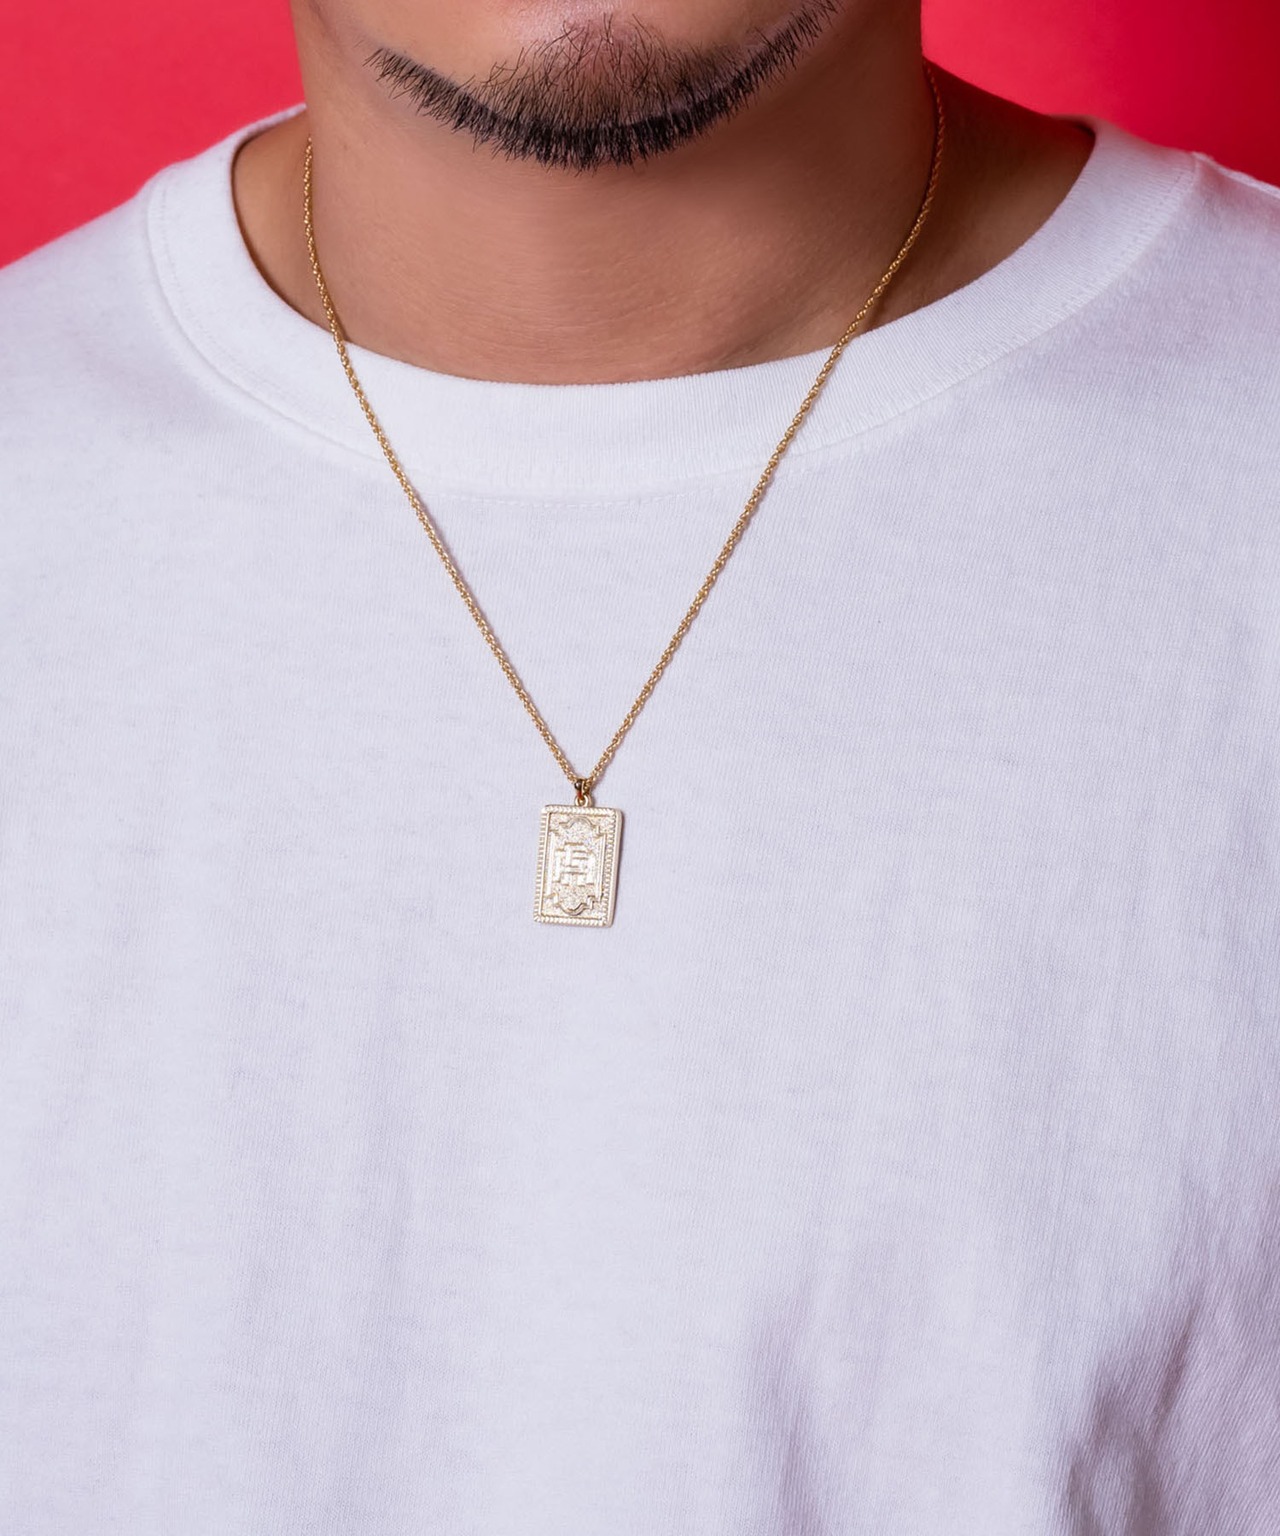 【#Re:room】ICON PLATE TOP SCREW CHAIN NECKLACE ［REA216］